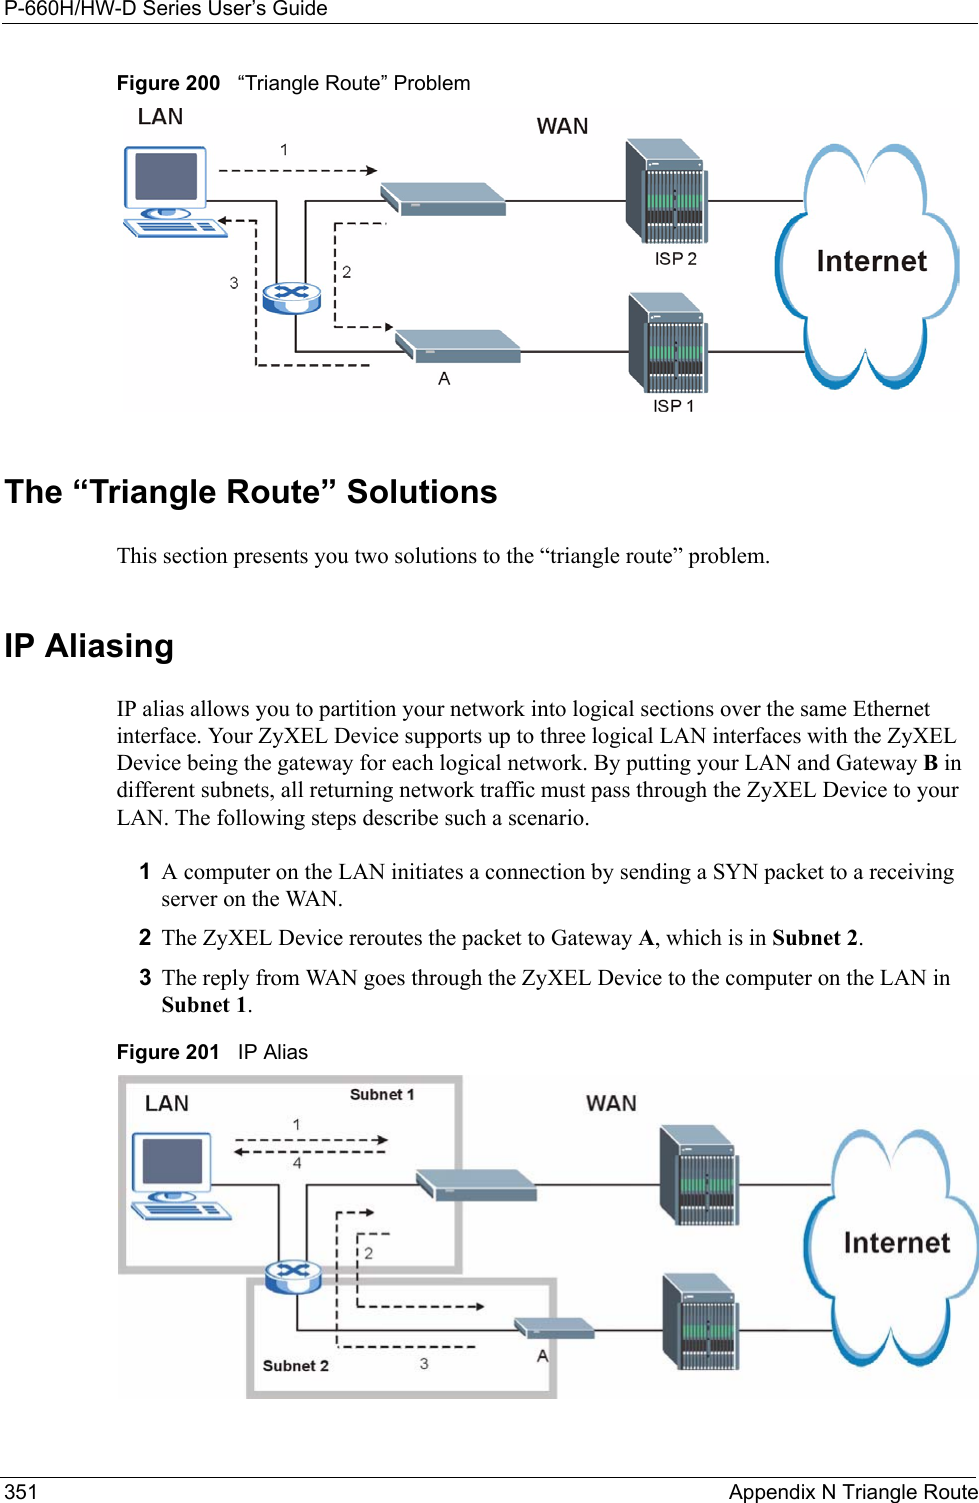 P-660H/HW-D Series User’s Guide351 Appendix N Triangle RouteFigure 200   “Triangle Route” ProblemThe “Triangle Route” SolutionsThis section presents you two solutions to the “triangle route” problem. IP Aliasing IP alias allows you to partition your network into logical sections over the same Ethernet interface. Your ZyXEL Device supports up to three logical LAN interfaces with the ZyXEL Device being the gateway for each logical network. By putting your LAN and Gateway B in different subnets, all returning network traffic must pass through the ZyXEL Device to your LAN. The following steps describe such a scenario.1A computer on the LAN initiates a connection by sending a SYN packet to a receiving server on the WAN. 2The ZyXEL Device reroutes the packet to Gateway A, which is in Subnet 2. 3The reply from WAN goes through the ZyXEL Device to the computer on the LAN in Subnet 1. Figure 201   IP Alias